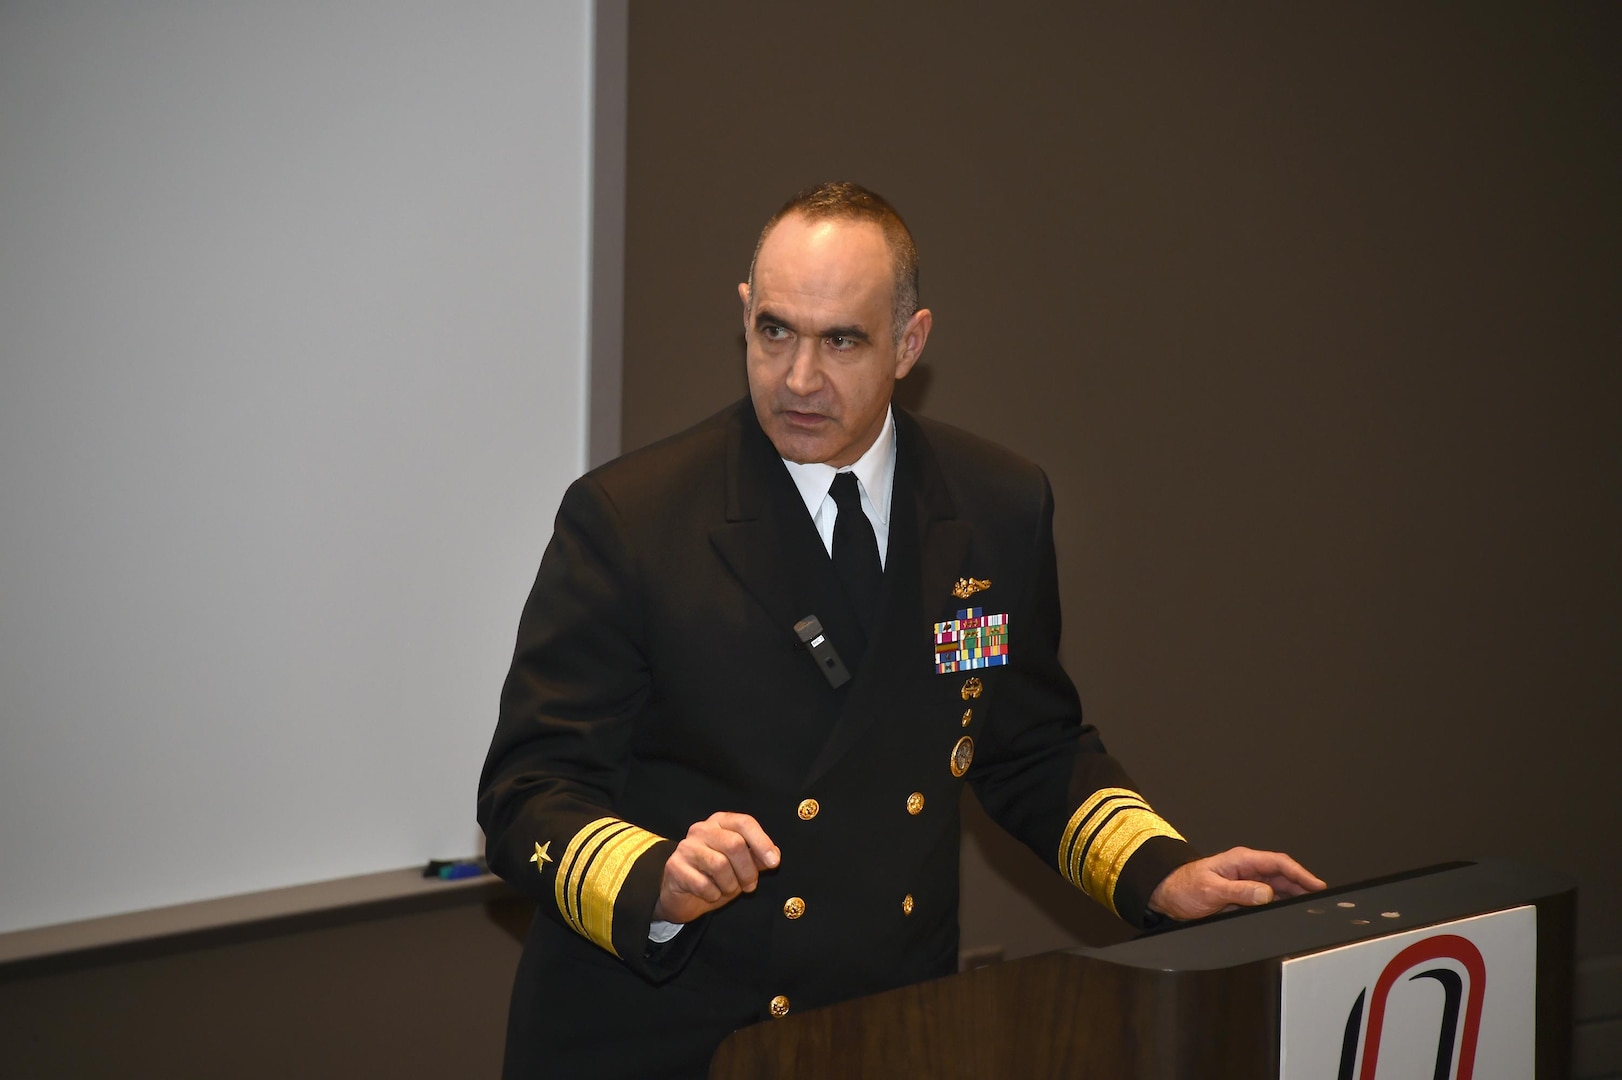 U.S. Navy Vice Adm. Charles “Chas” A. Richard, deputy commander of U.S. Strategic Command (USSTRATCOM), delivers the keynote address during the USSTRATCOM Leadership Fellows Program kickoff at the University of Nebraska at Omaha’s Mammel Hall, Jan. 20, 2017. The fellows program is designed to develop high-potential civilian leaders in support of USSTRATCOM organizational transformation, broaden mission awareness and develop leadership skills. One of nine DoD unified combatant commands, USSTRATCOM has global strategic missions assigned through the Unified Command Plan that include strategic deterrence; space operations; cyberspace operations; joint electronic warfare; global strike; missile defense; intelligence, surveillance and reconnaissance; and analysis and targeting.